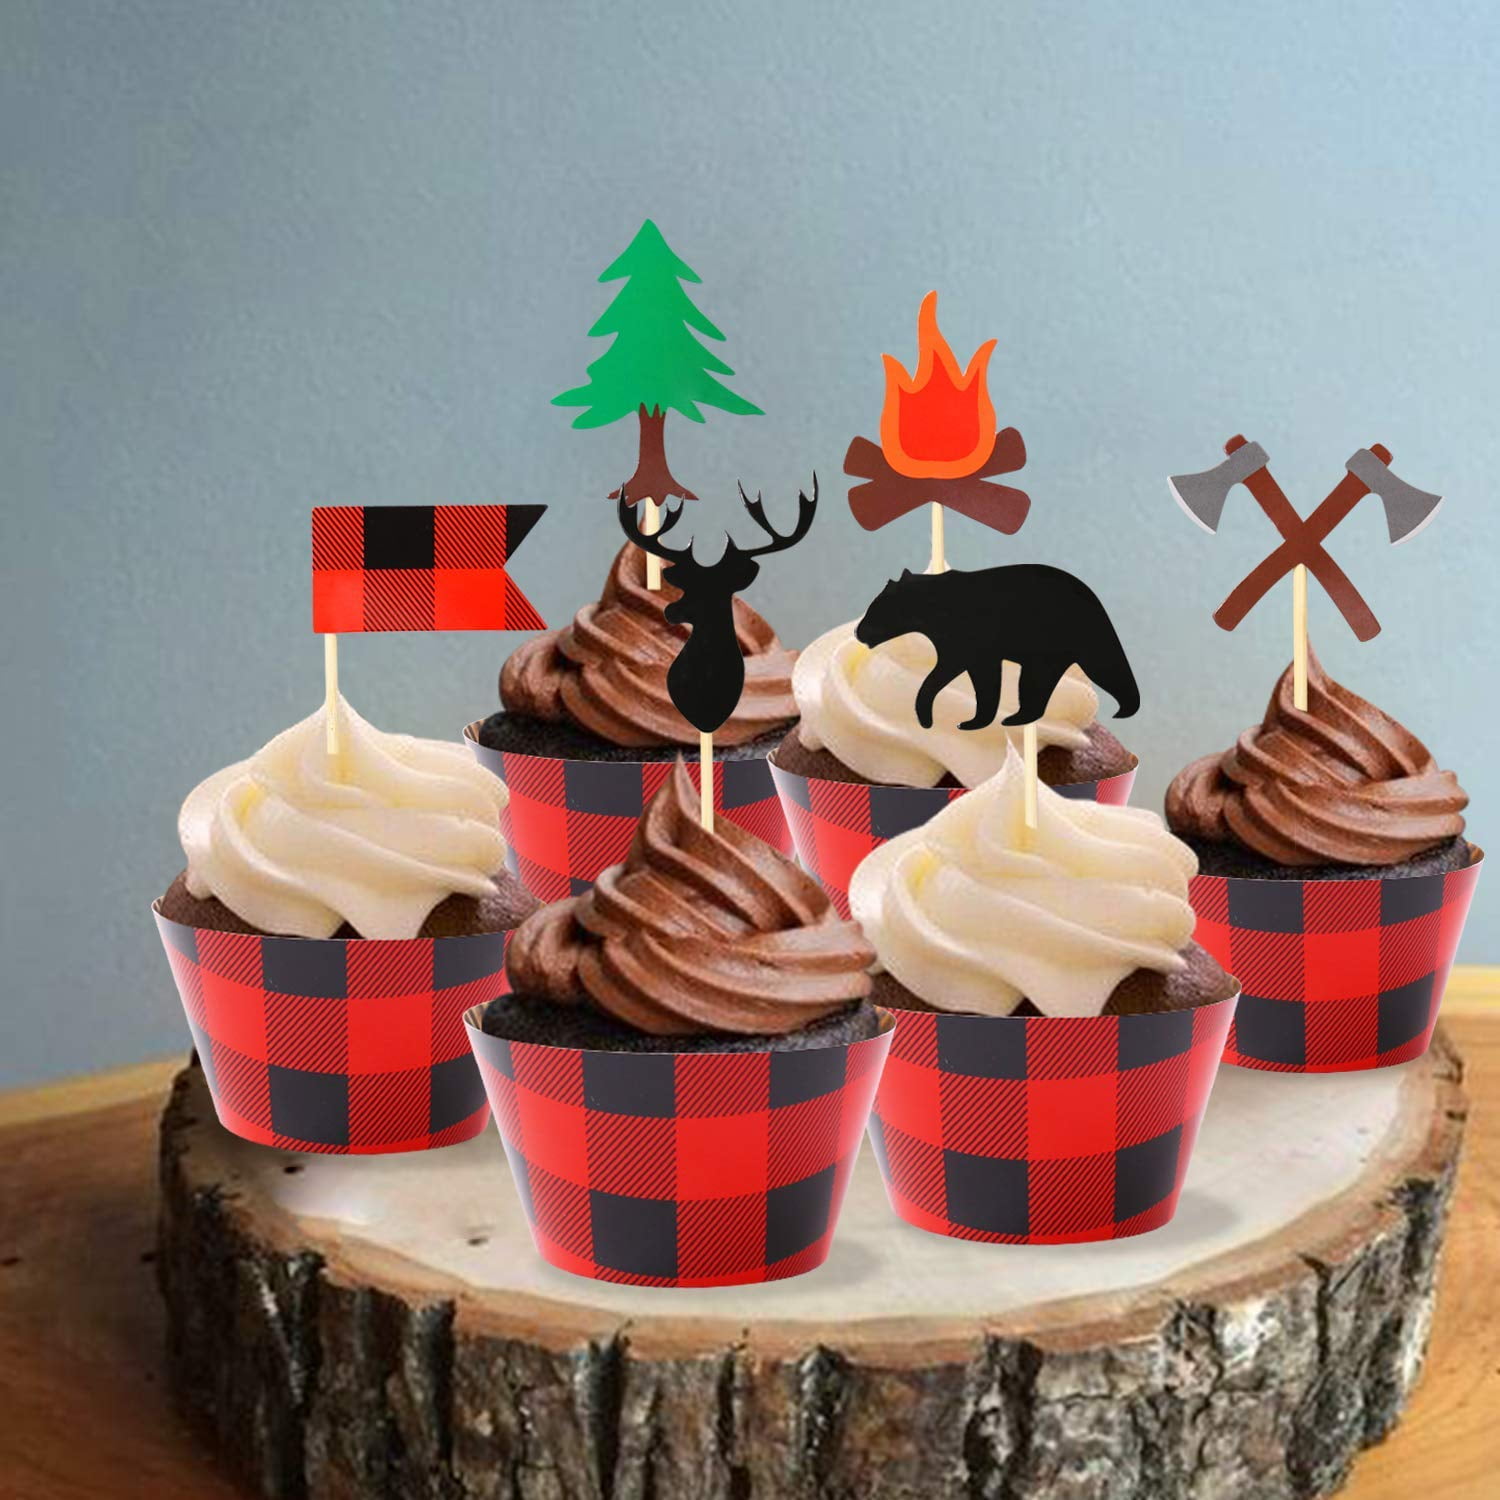 24 Pack Camping Cupcake Toppers Wood Grain Buffalo Plaid Wrappers Woodland Theme Party Decoration Supplies